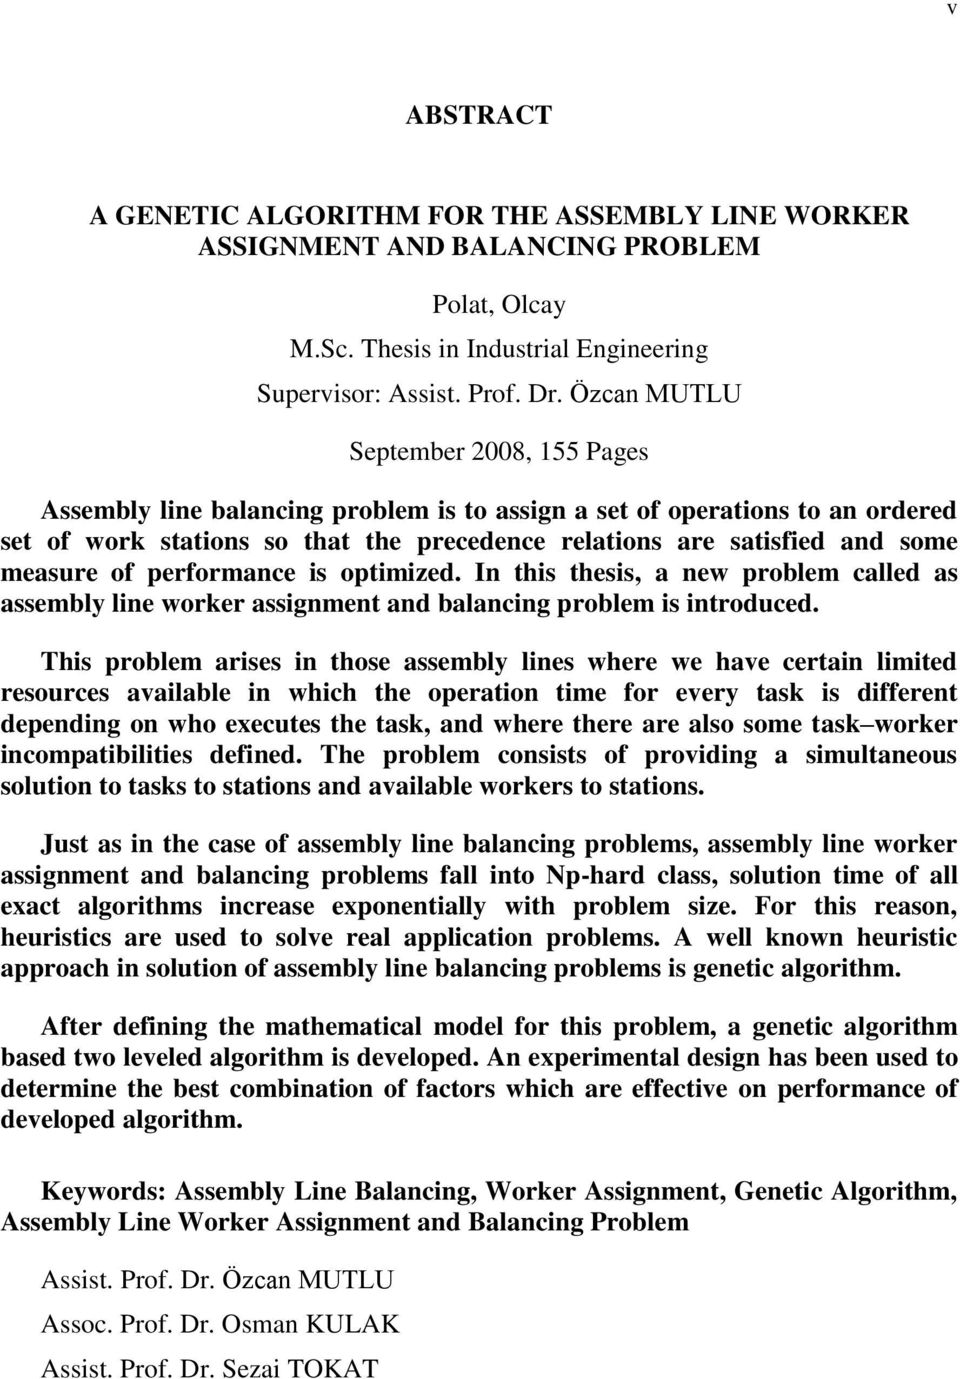 measure of performance is optimized. In this thesis, a new problem called as assembly line worker assignment and balancing problem is introduced.